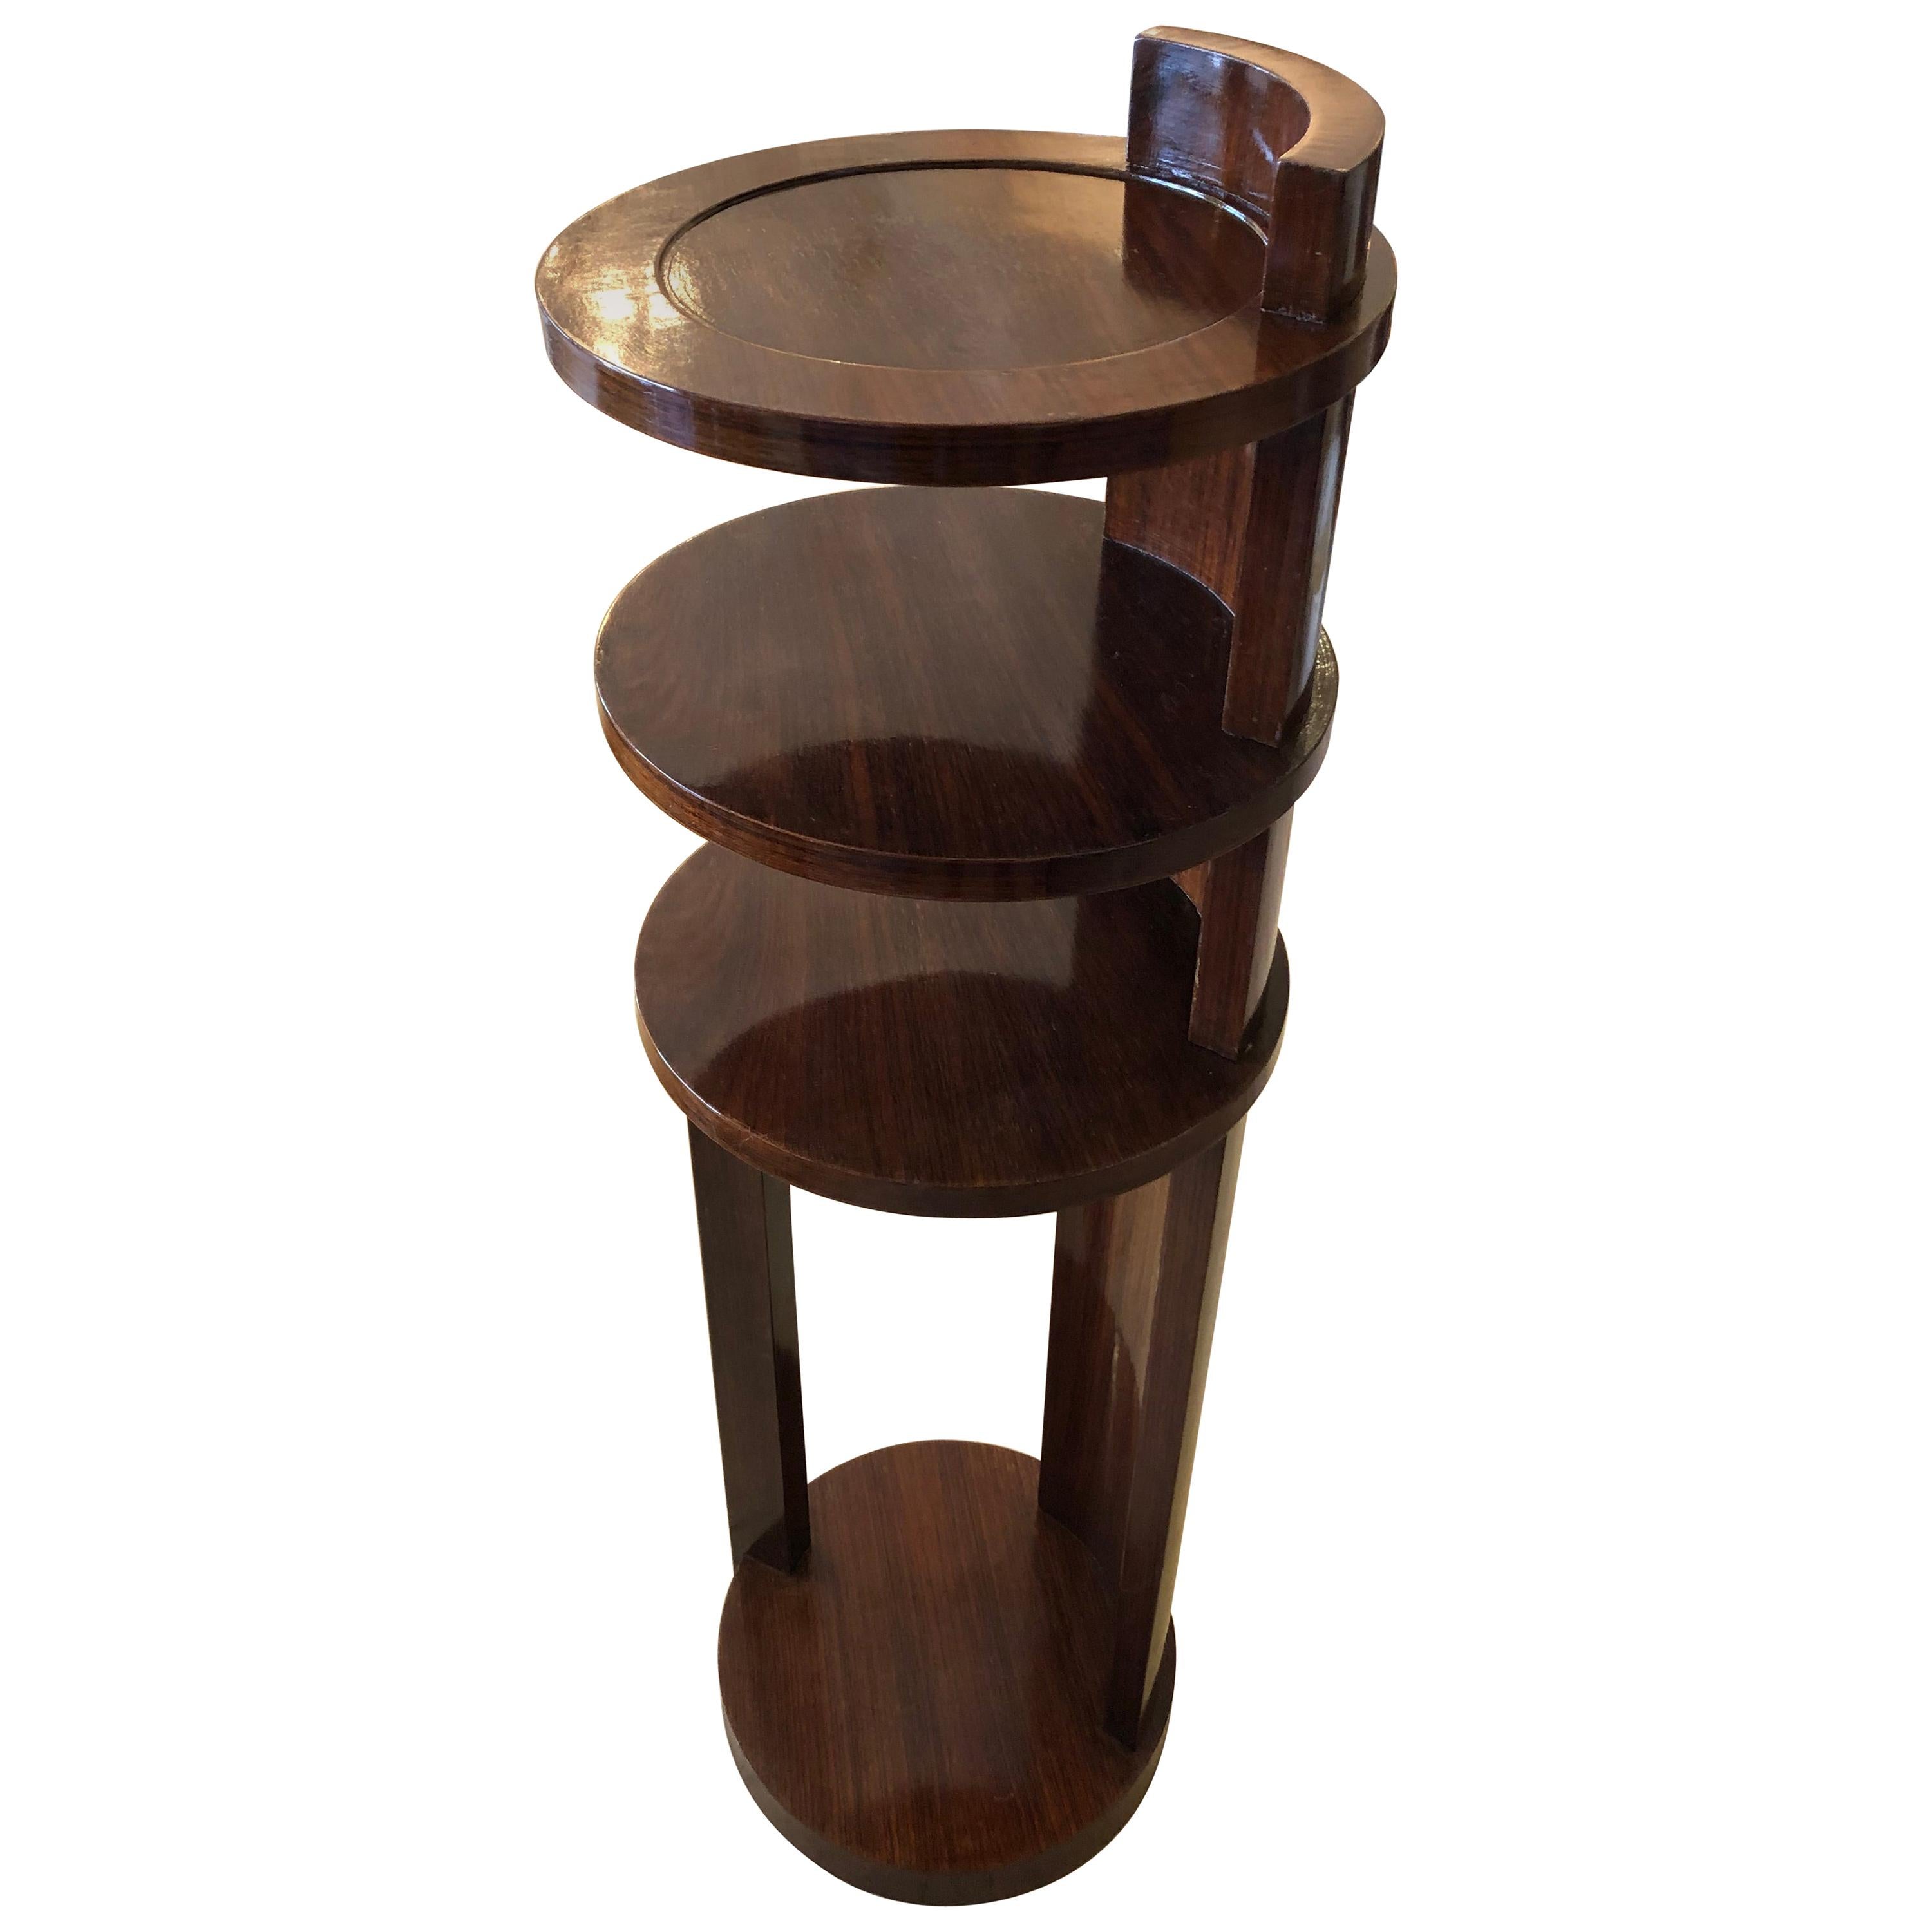 Stylish Art Deco Circular 4 Tier Rosewood Étagère End Table Stand